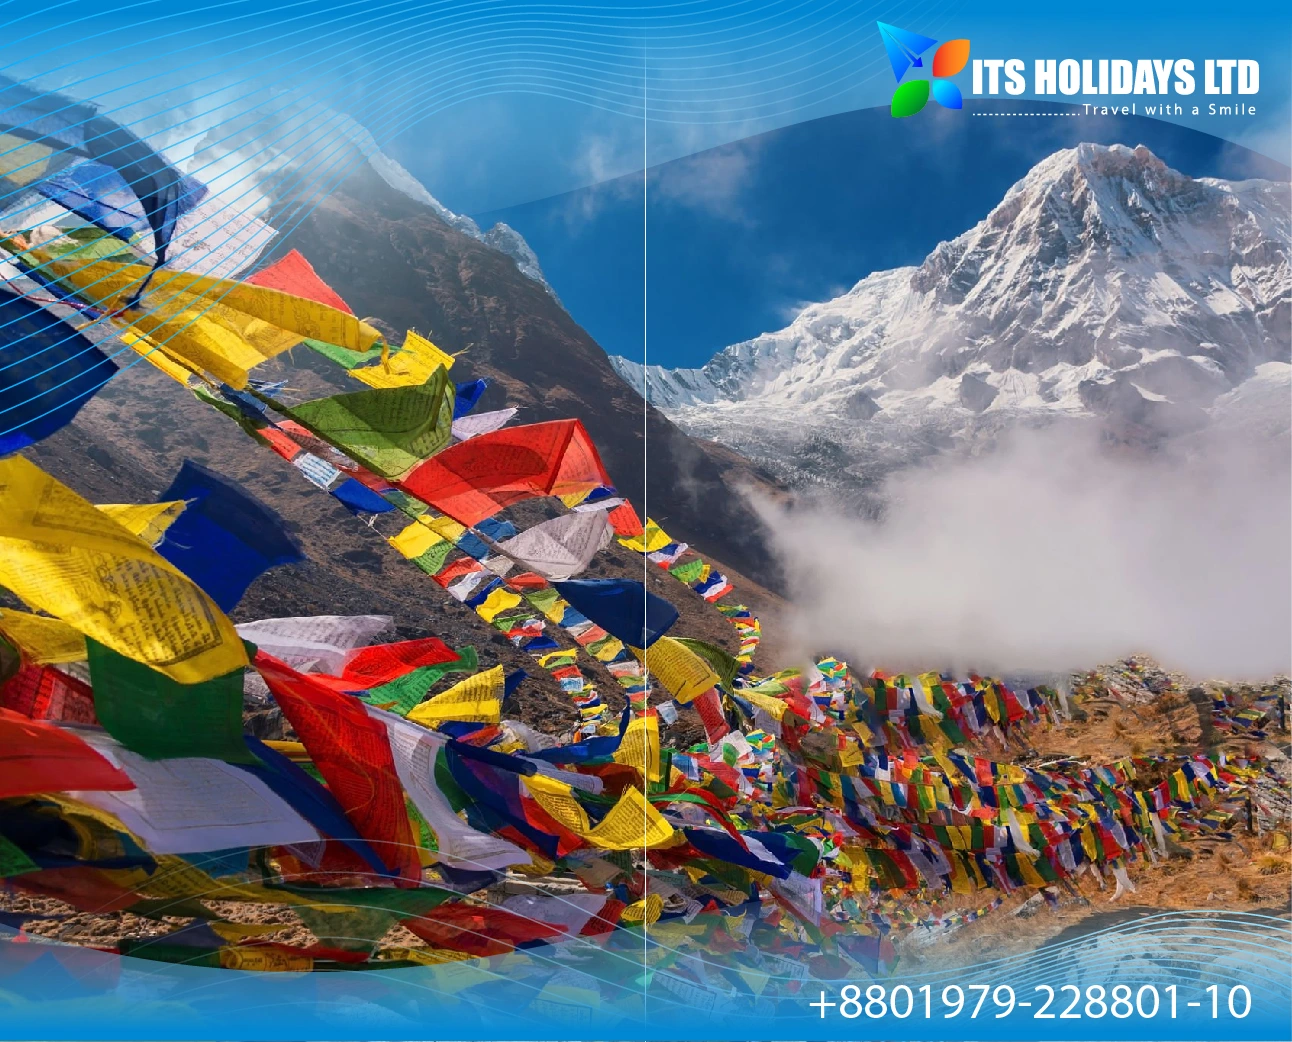 Best Selling Nepal Tour Package from Bangladesh - 03